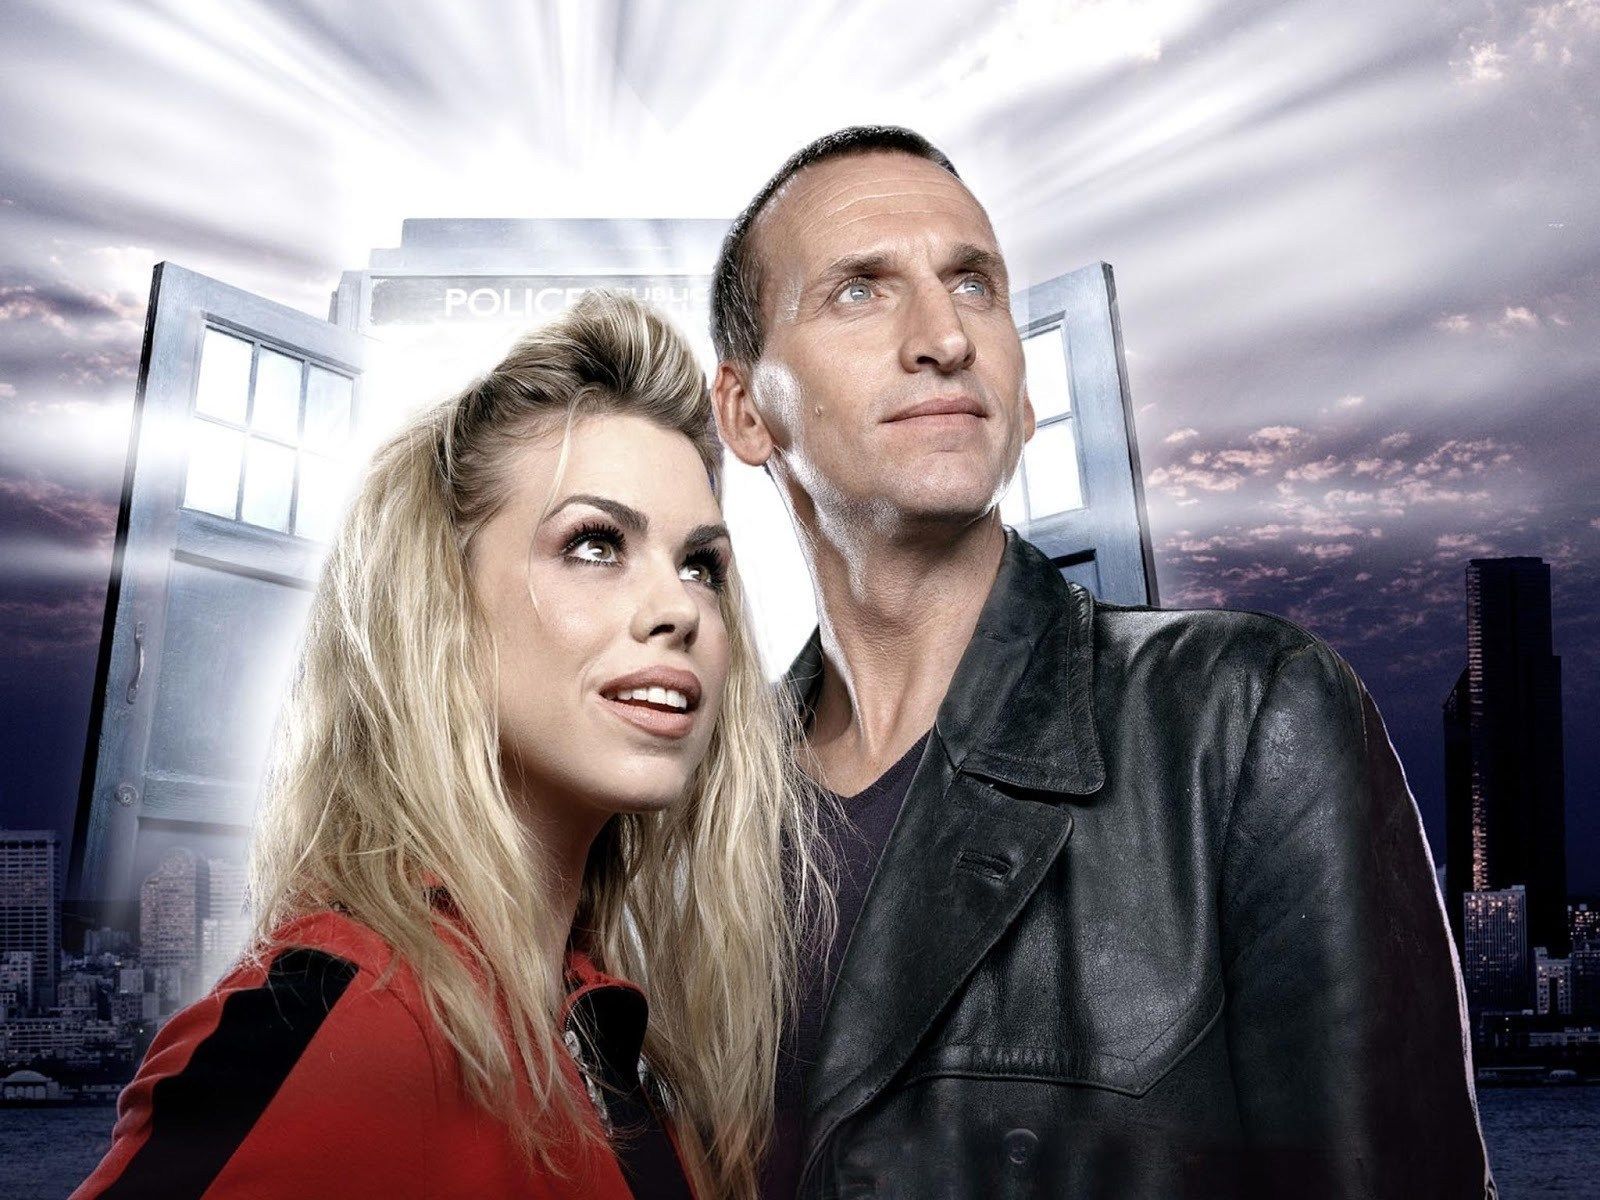 Time Lord Victorious: The Ninth Doctor Returns to Doctor Who